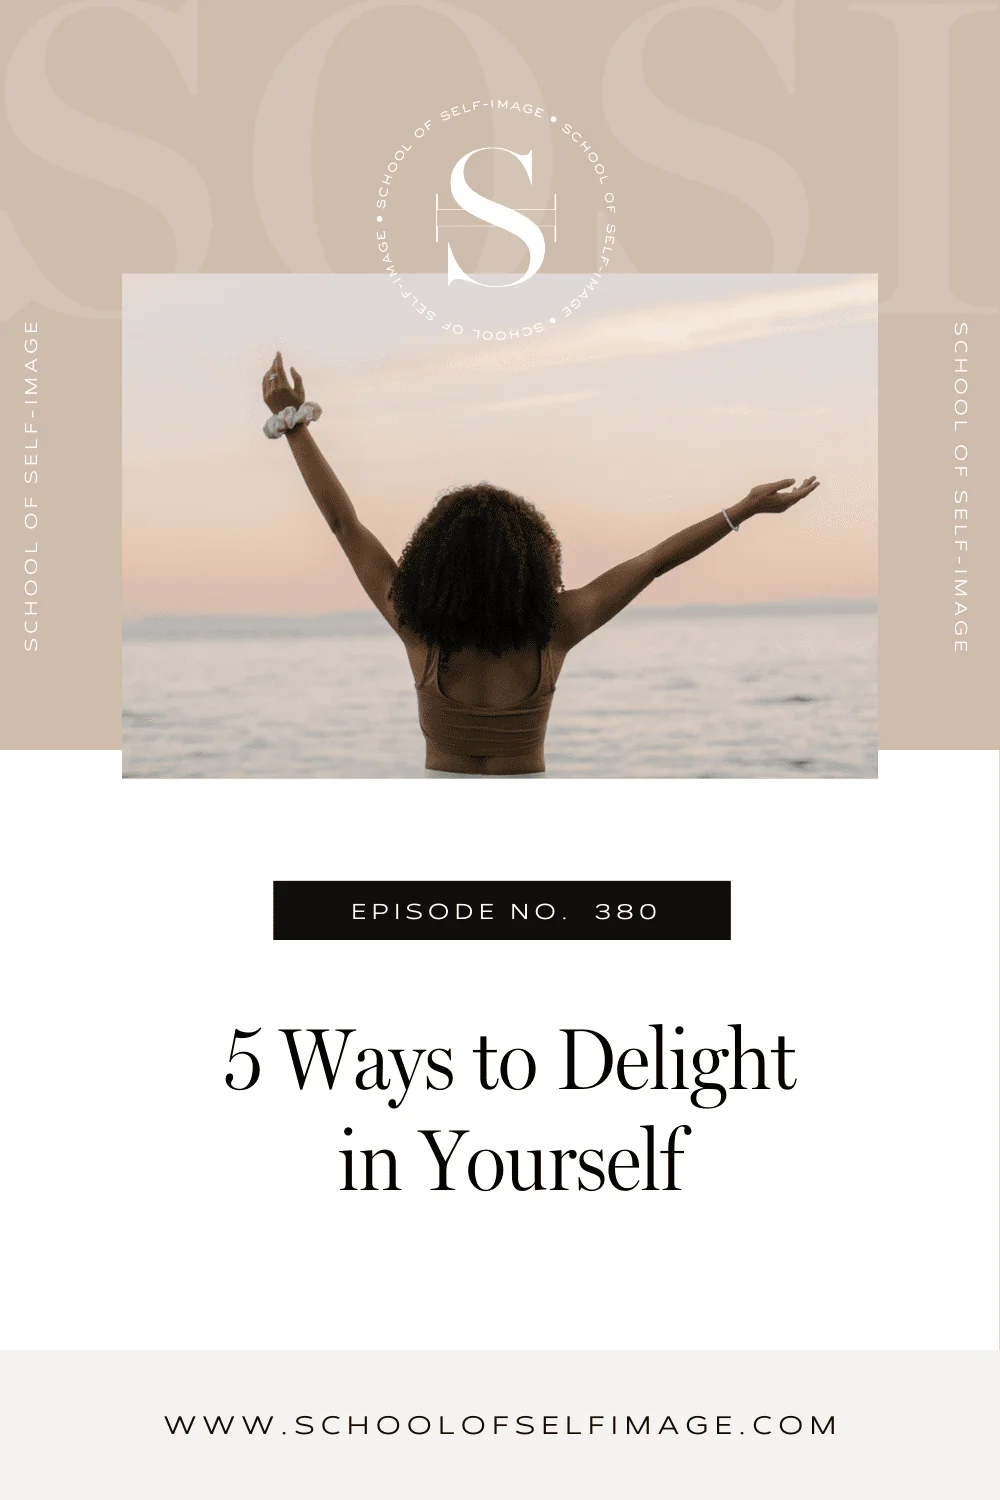 5 Ways to Delight in Yourself